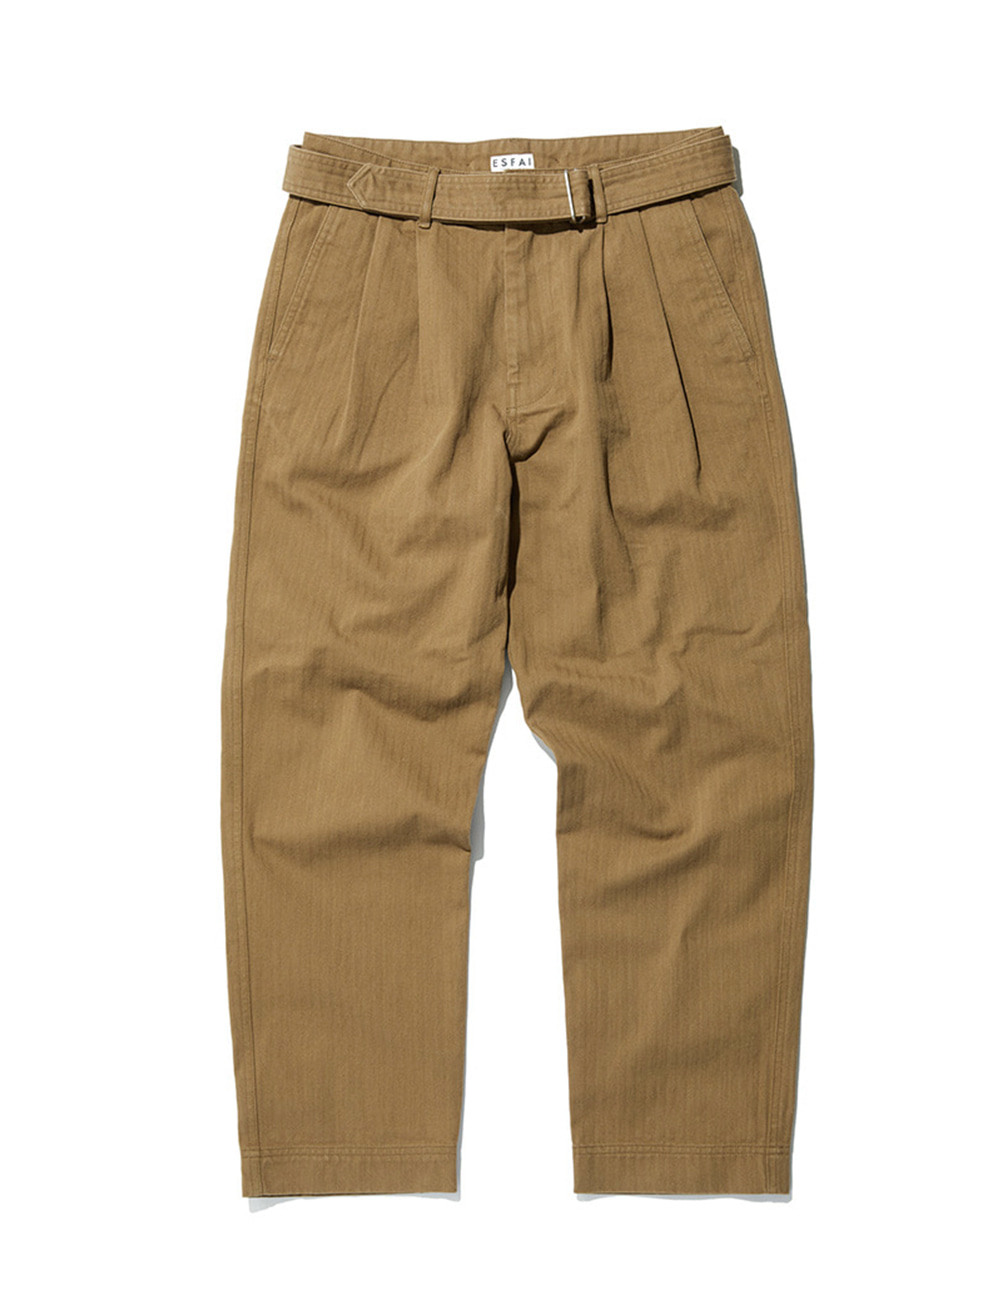 [ESFAI] Remain Belted Pants (Beige)